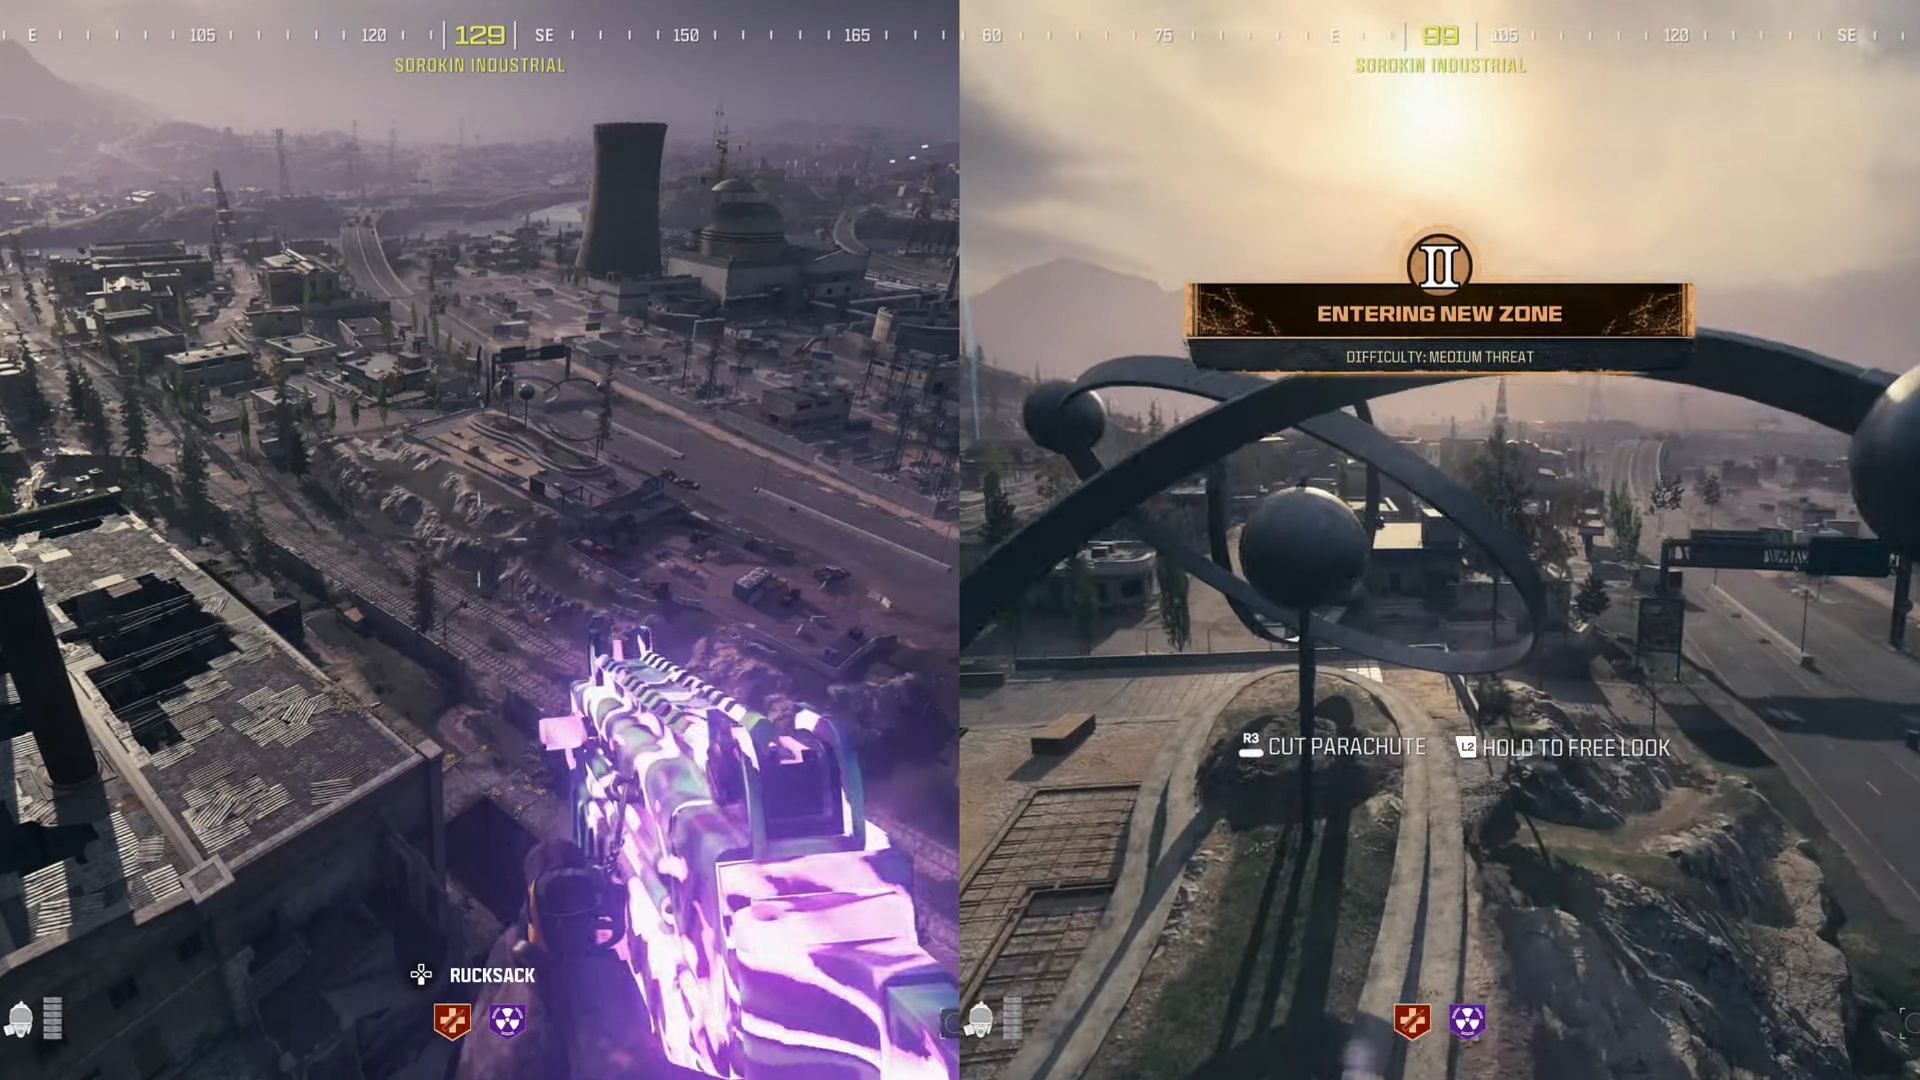 Free Death Perception perk location. (Image via Activision and YouTube/GregFPS)